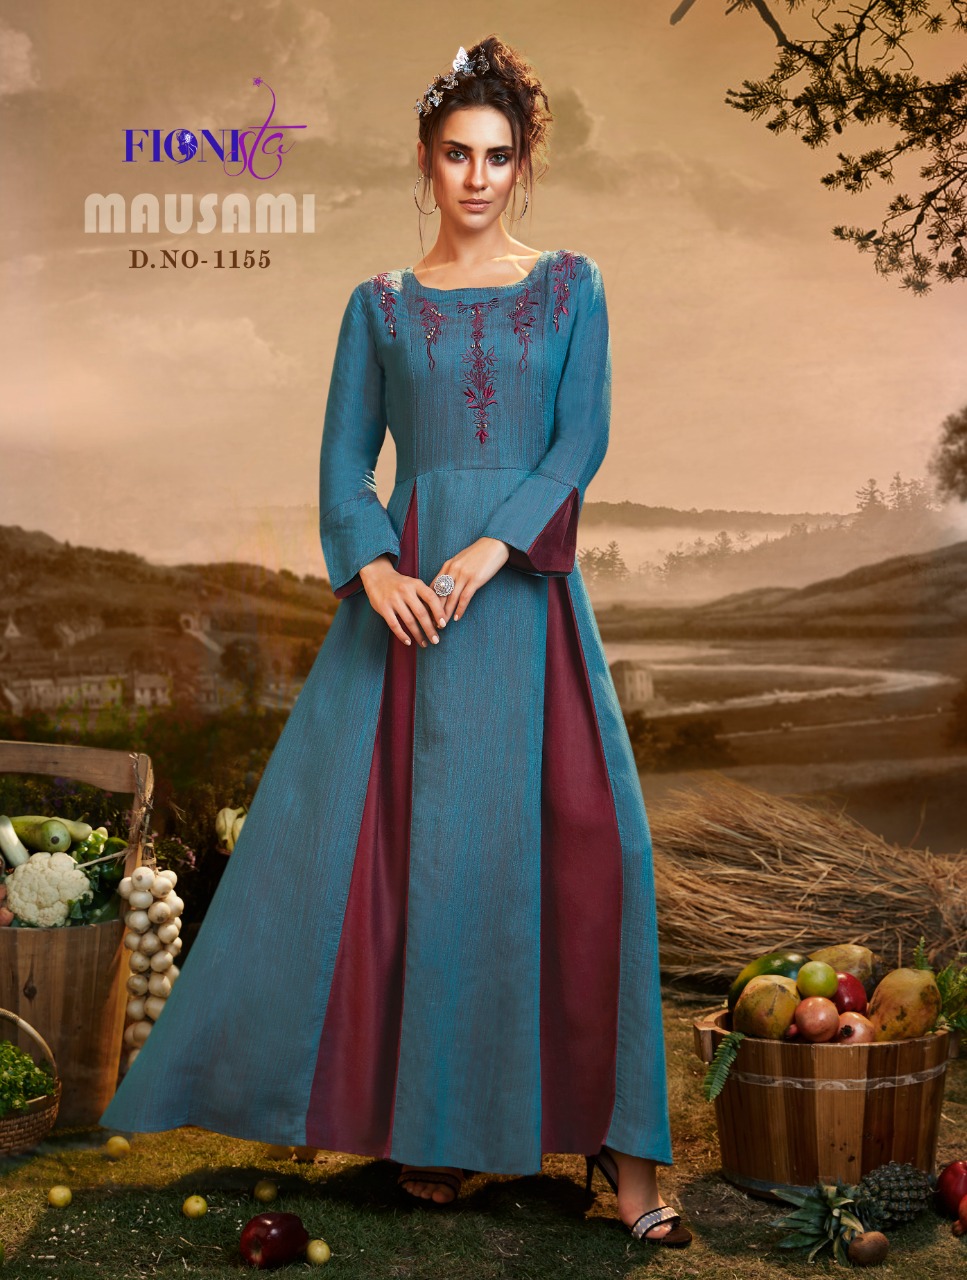 Fionista mausami long evening gown party wear collection